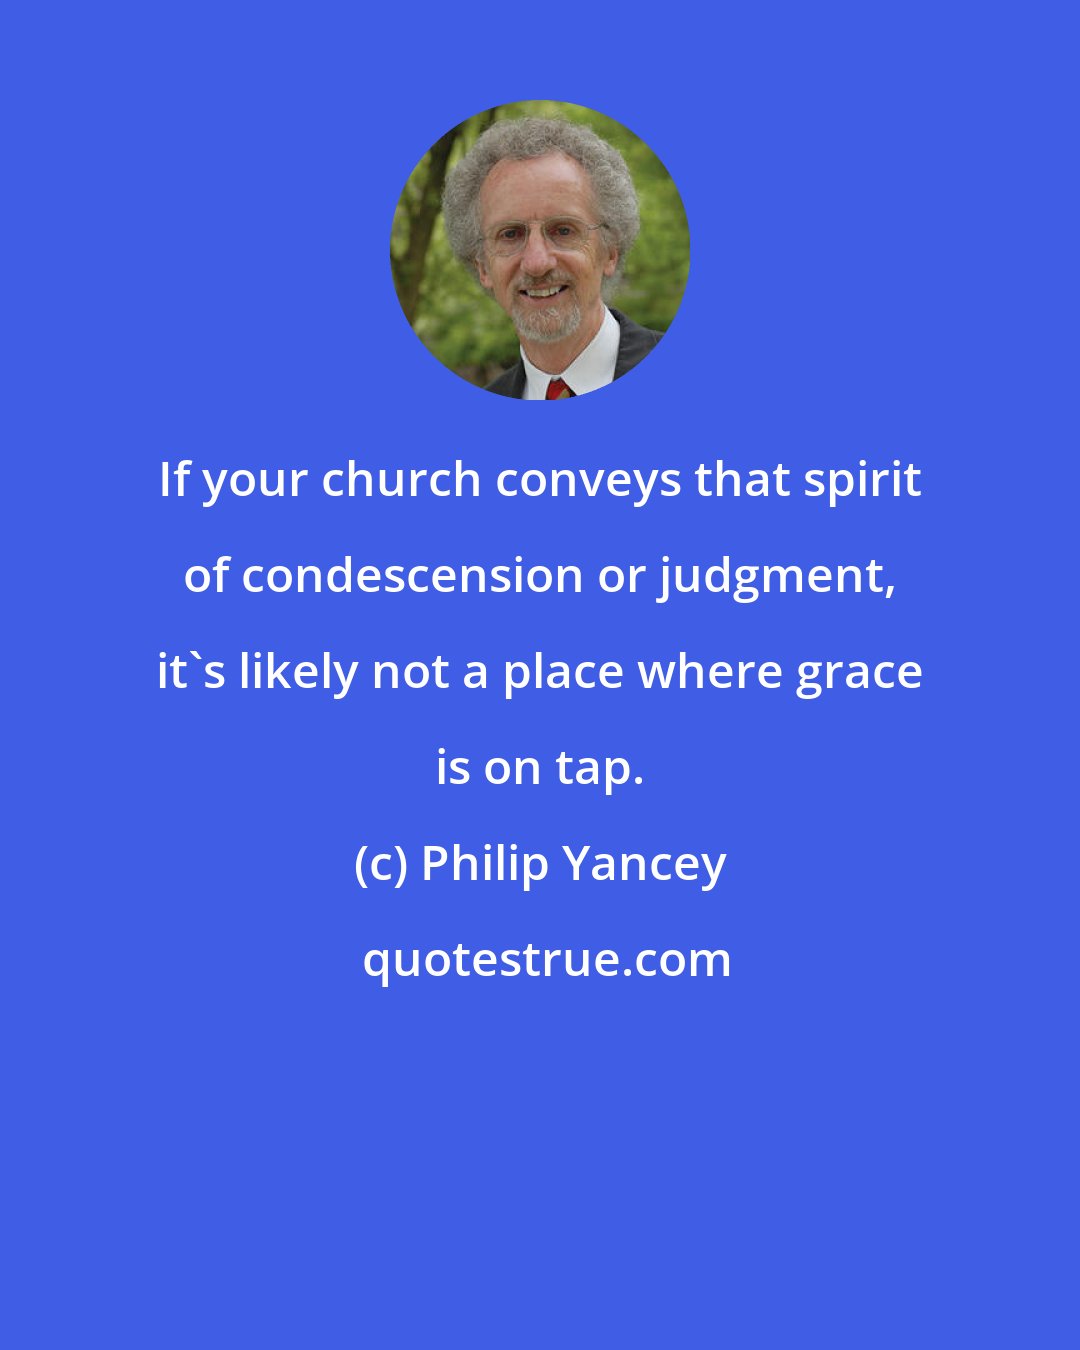 Philip Yancey: If your church conveys that spirit of condescension or judgment, it's likely not a place where grace is on tap.